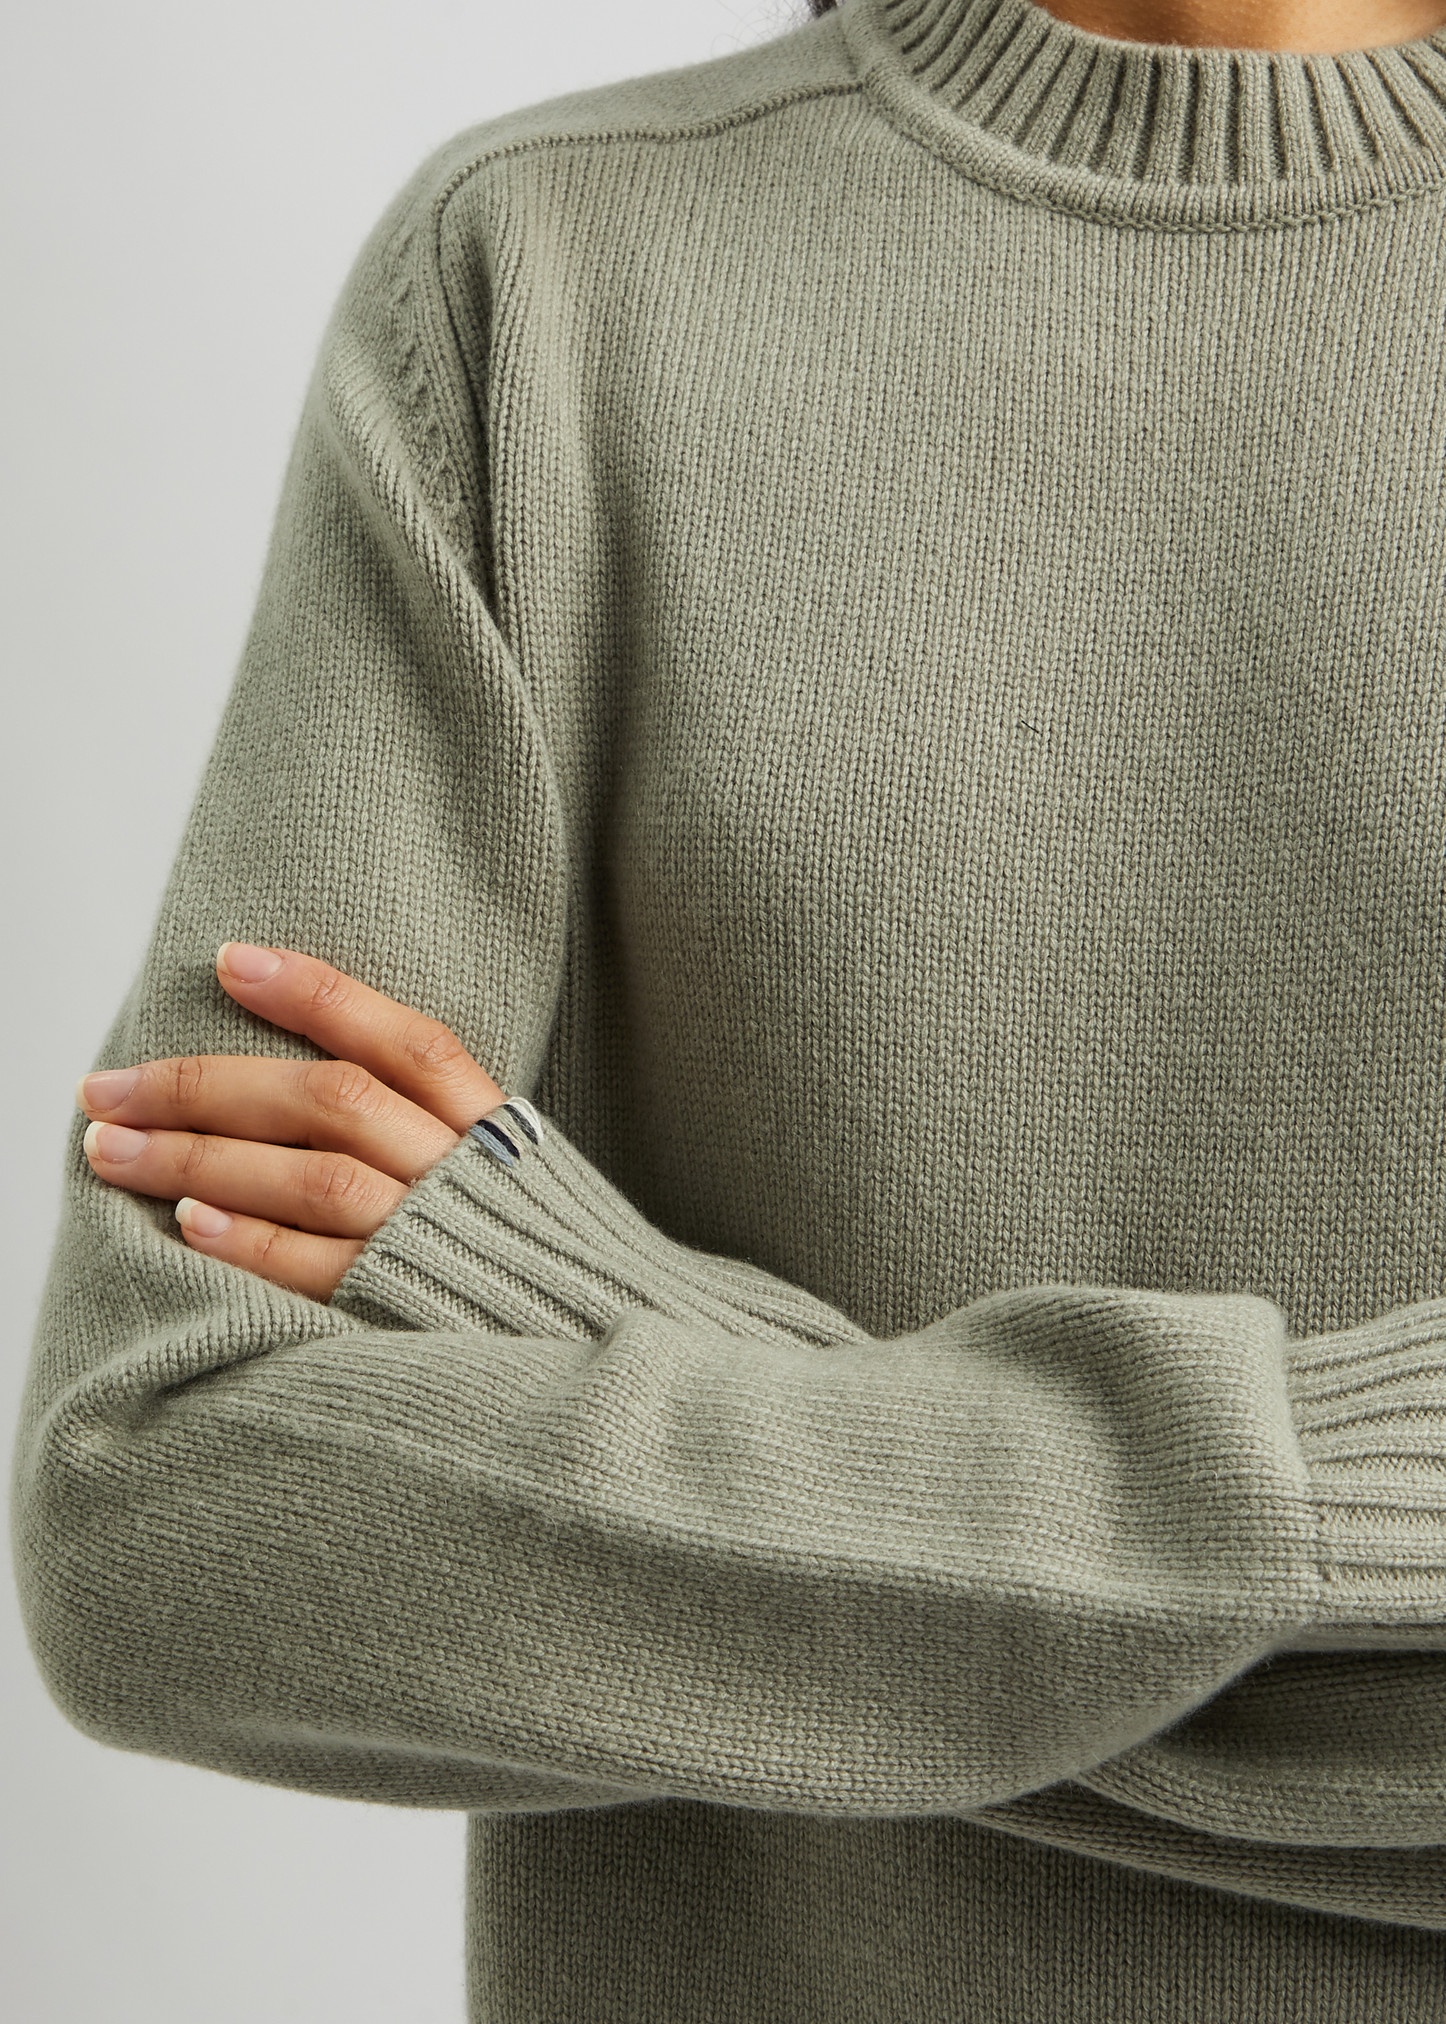 N°123 Bourgeois cashmere jumper - 5